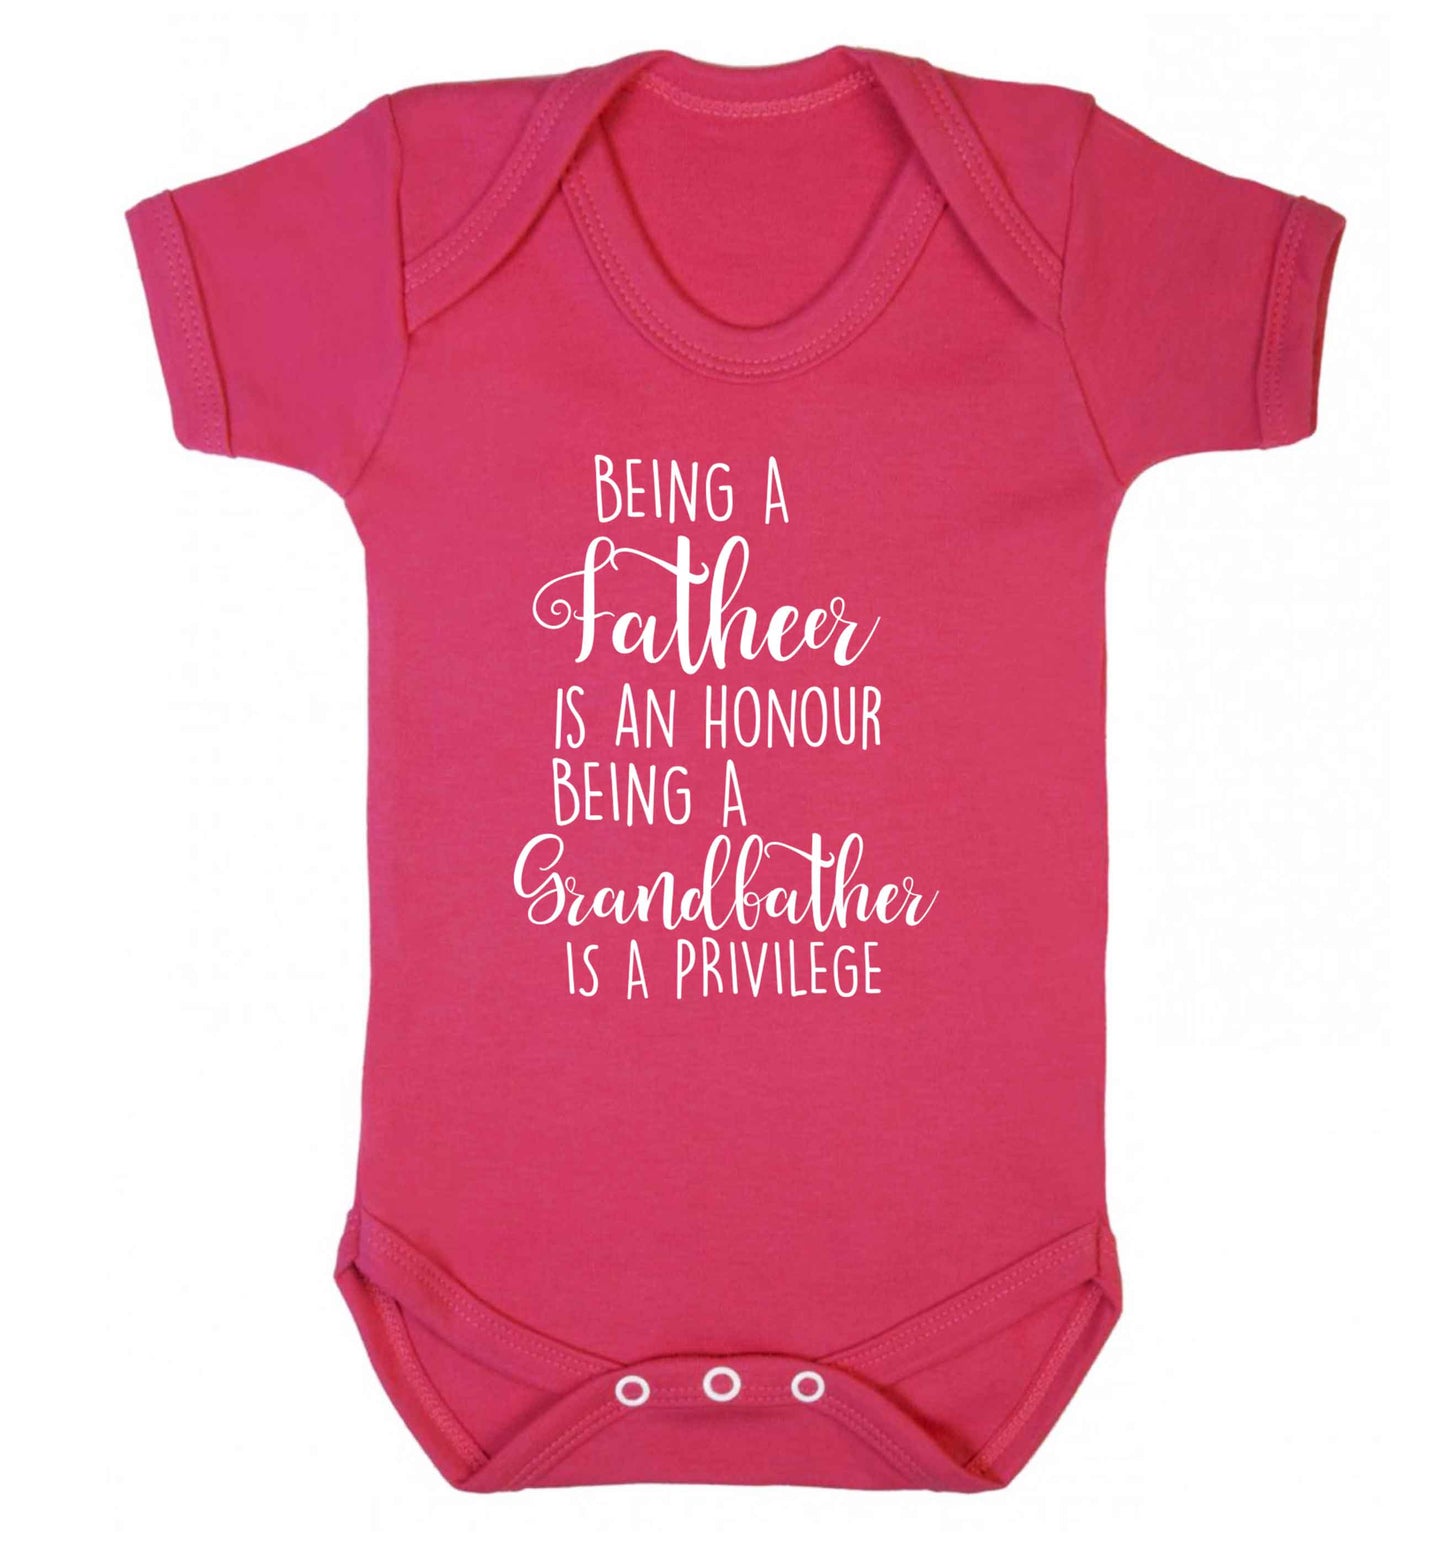 Being a father is an honour being a grandfather is a privilege Baby Vest dark pink 18-24 months